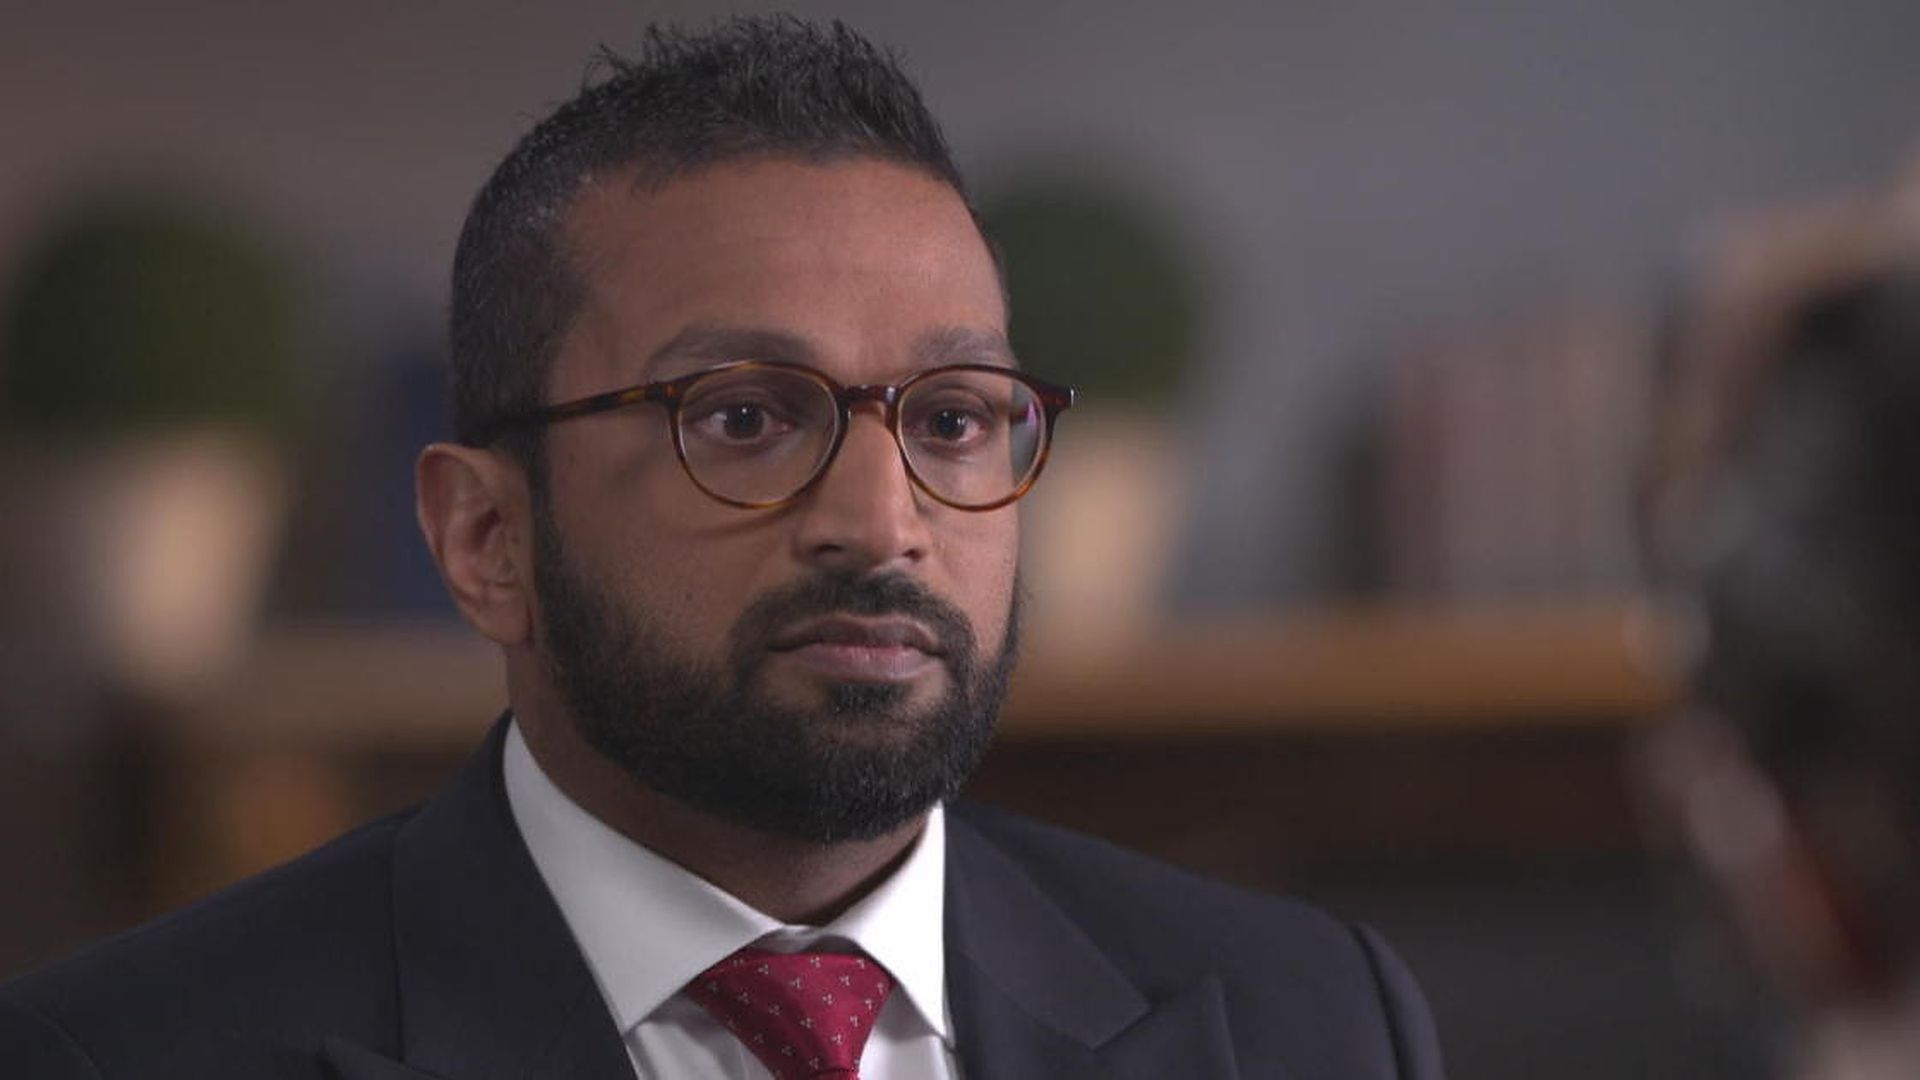 A screengrab of Kash Patel from his CBS interview.